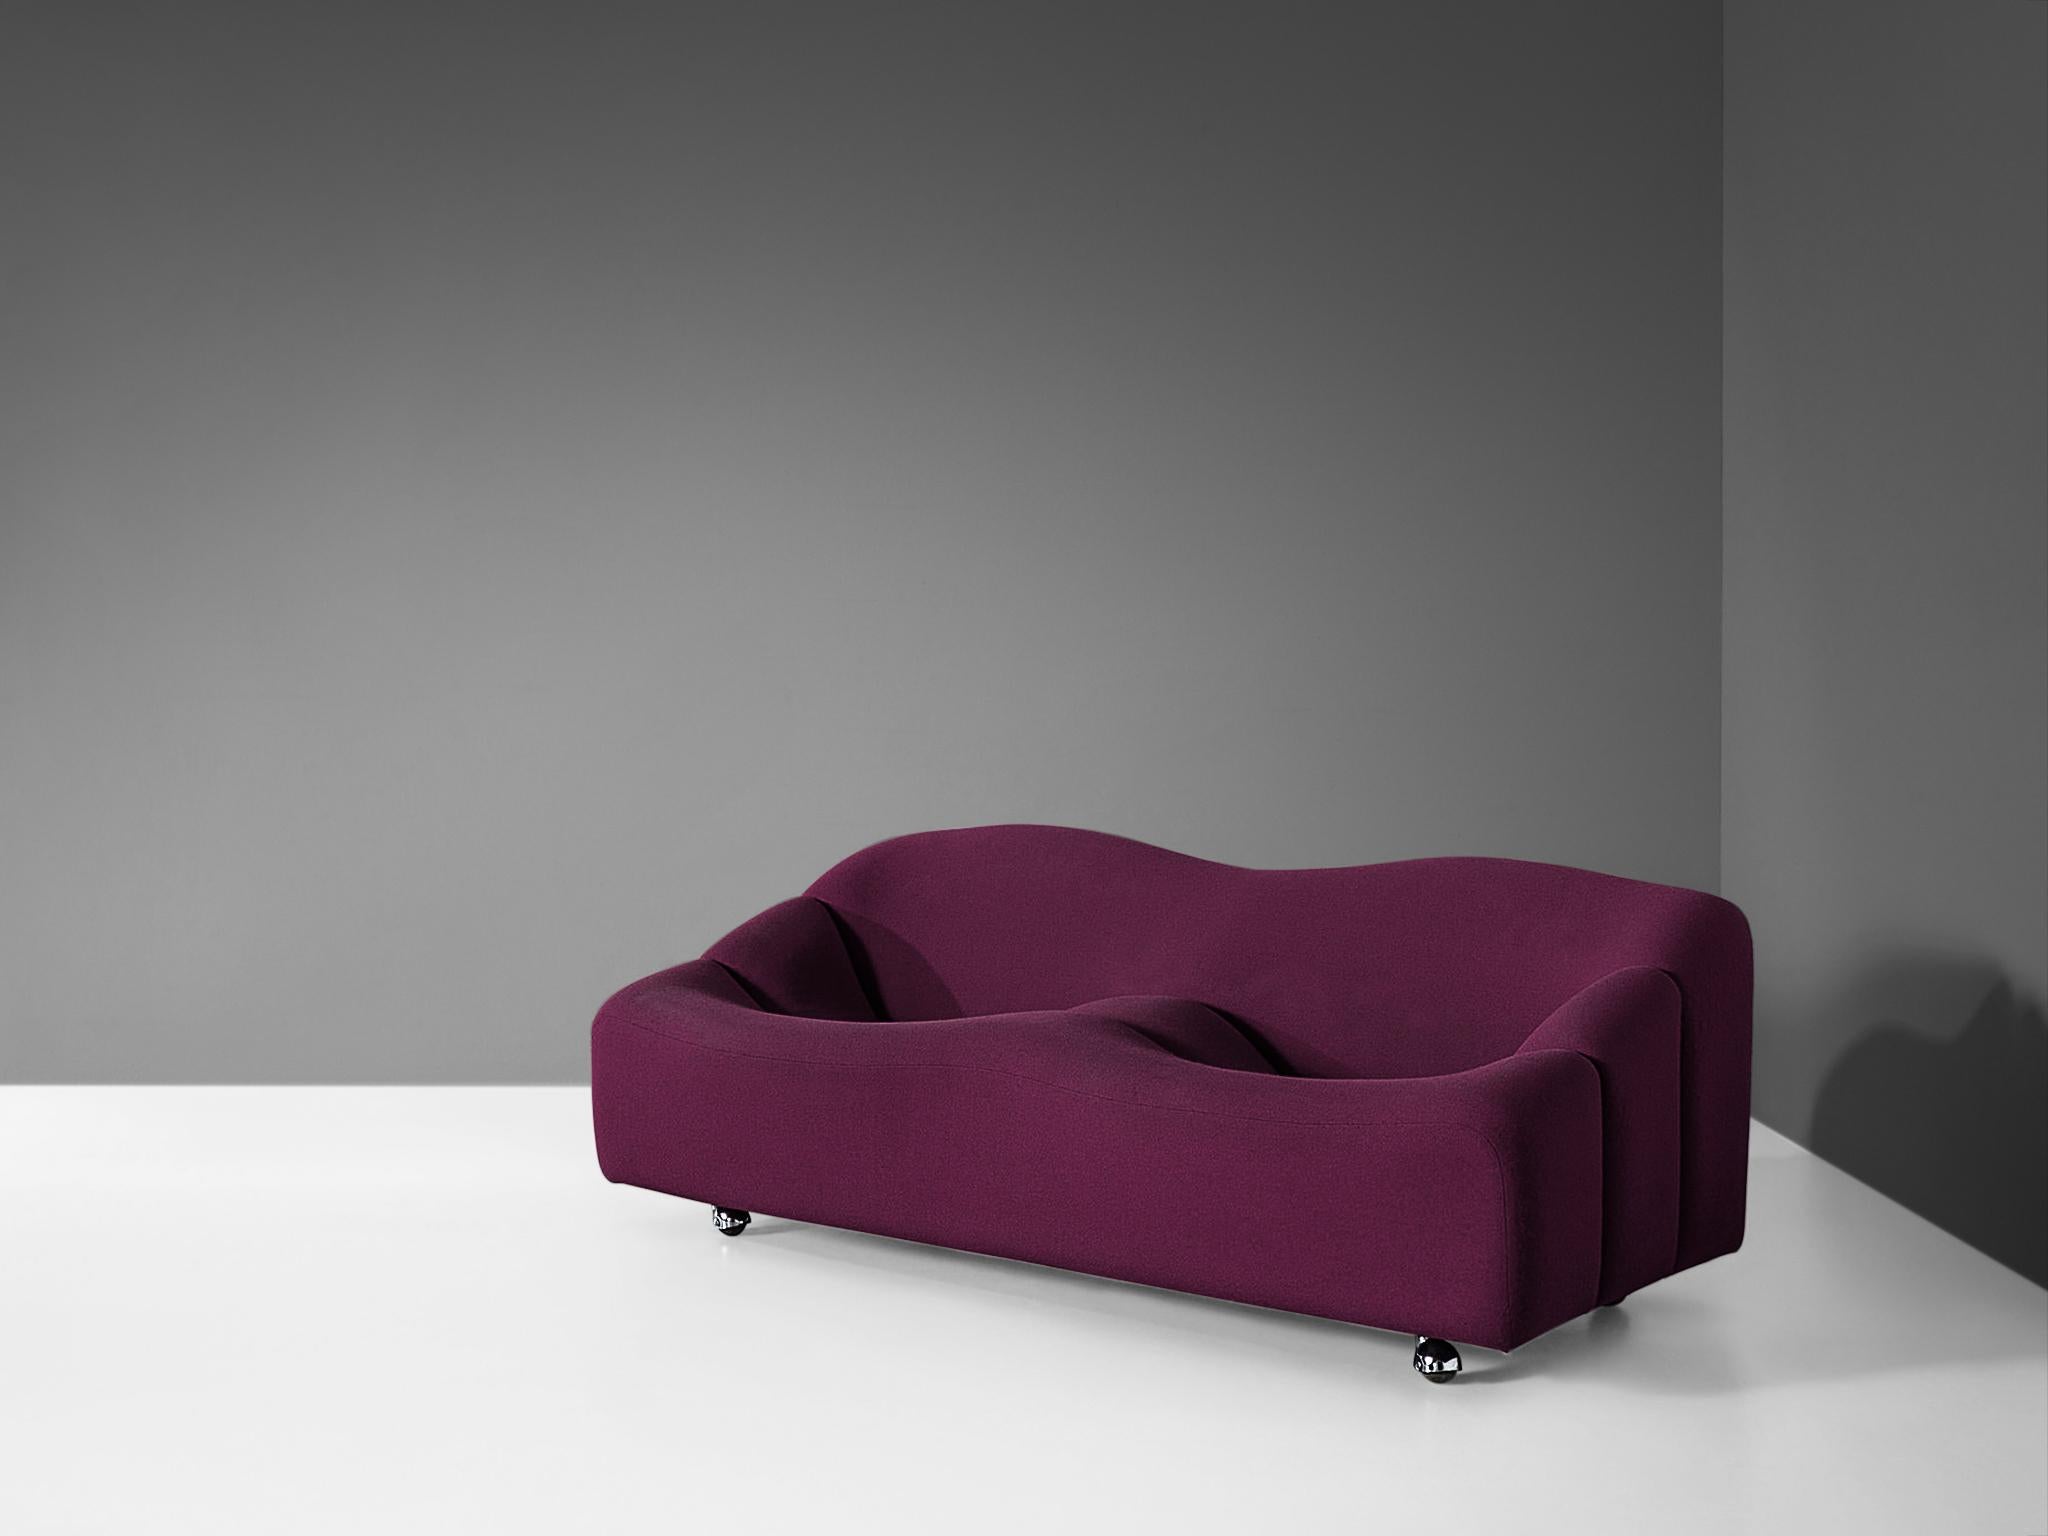 Pierre Paulin for Artifort, two-seat sofa from the ABCD series, fabric Kvadrat Hallingdal 65 - Color 0563, wood, metal, The Netherlands, design 1968. 

Beautifully curved and iconic two seat sofa by Pierre Paulin in a warm aubergine colored